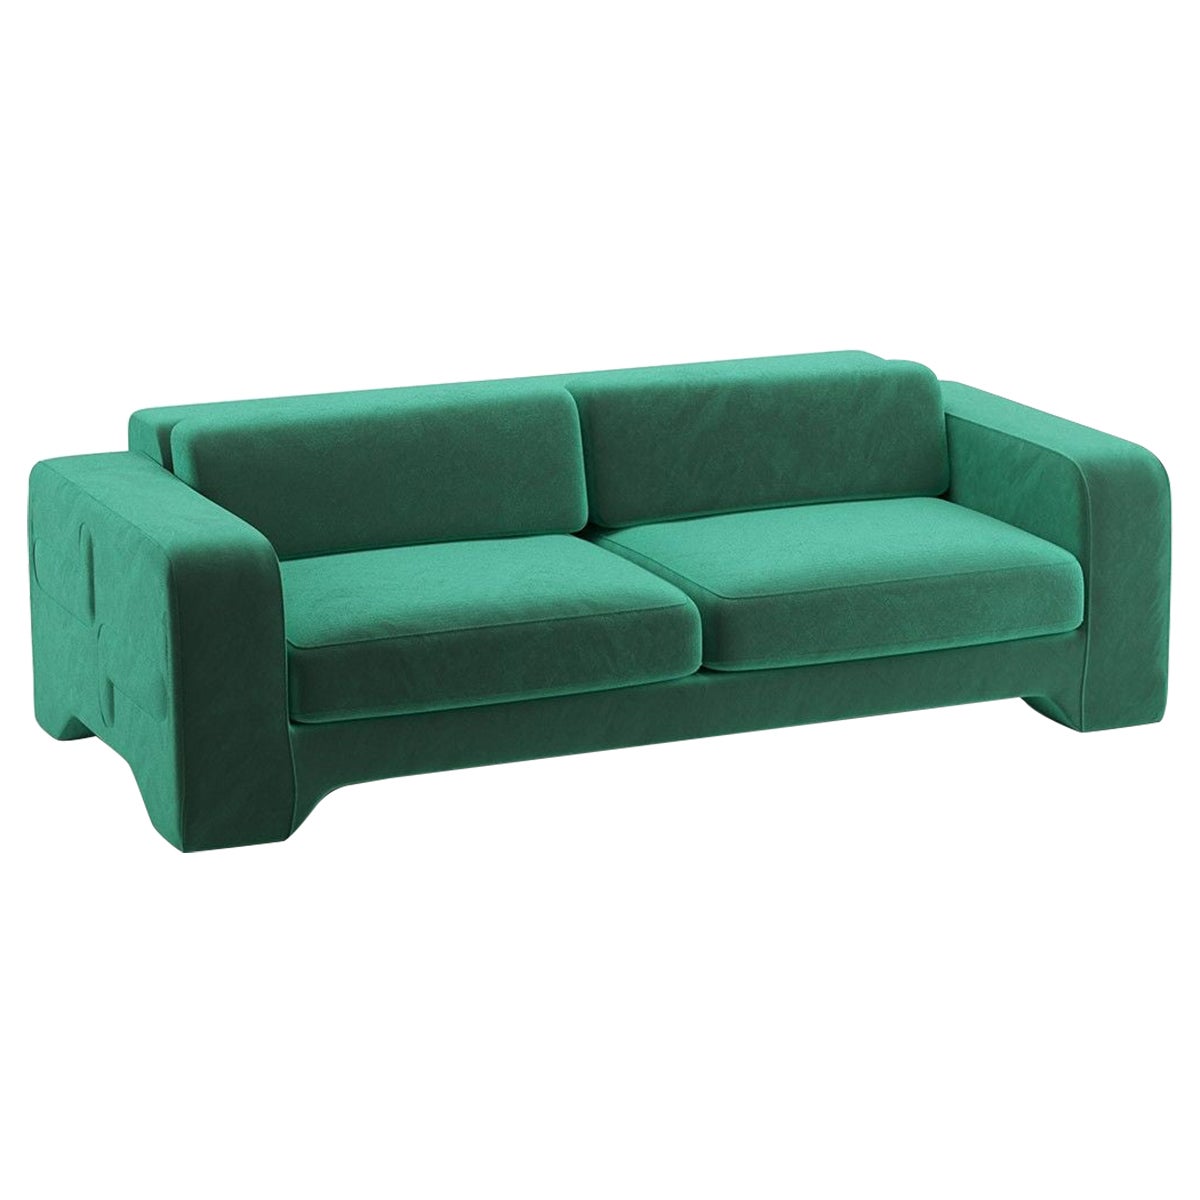 Popus Editions Giovanna 3 Seater Sofa in Green '772256' Como Velvet Upholstery For Sale